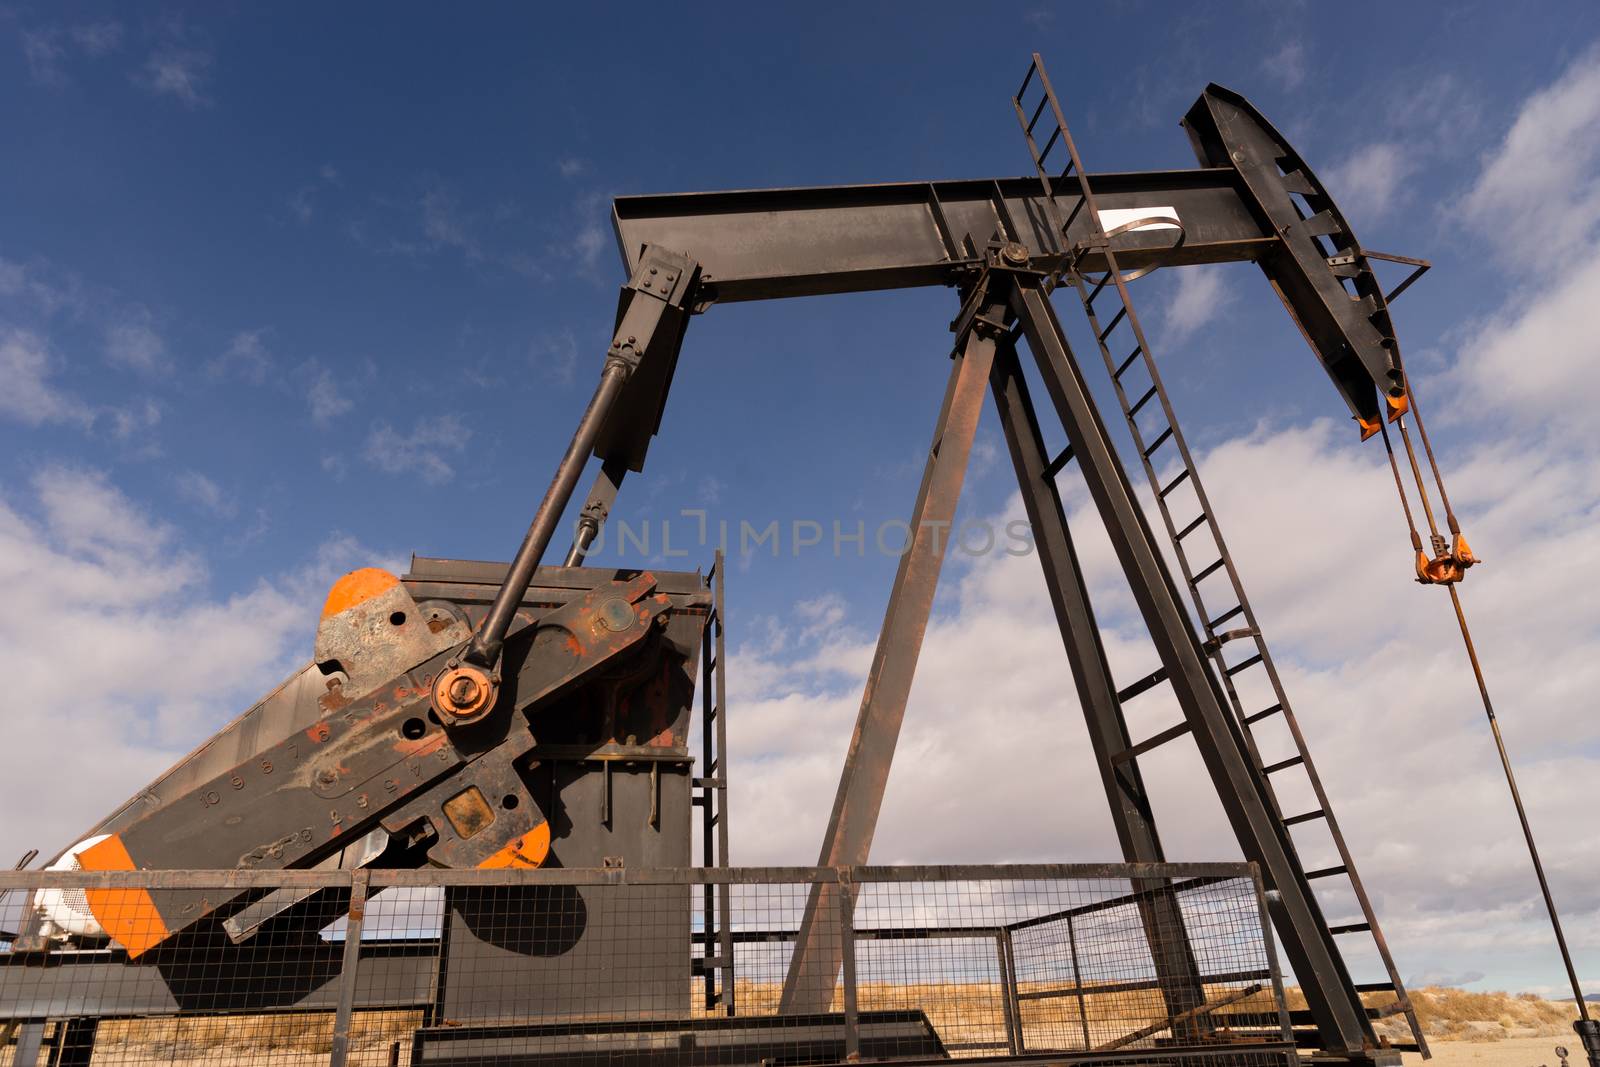 Wyoming Industrial Oil Pump Jack Fracking Crude Extraction Machi by ChrisBoswell